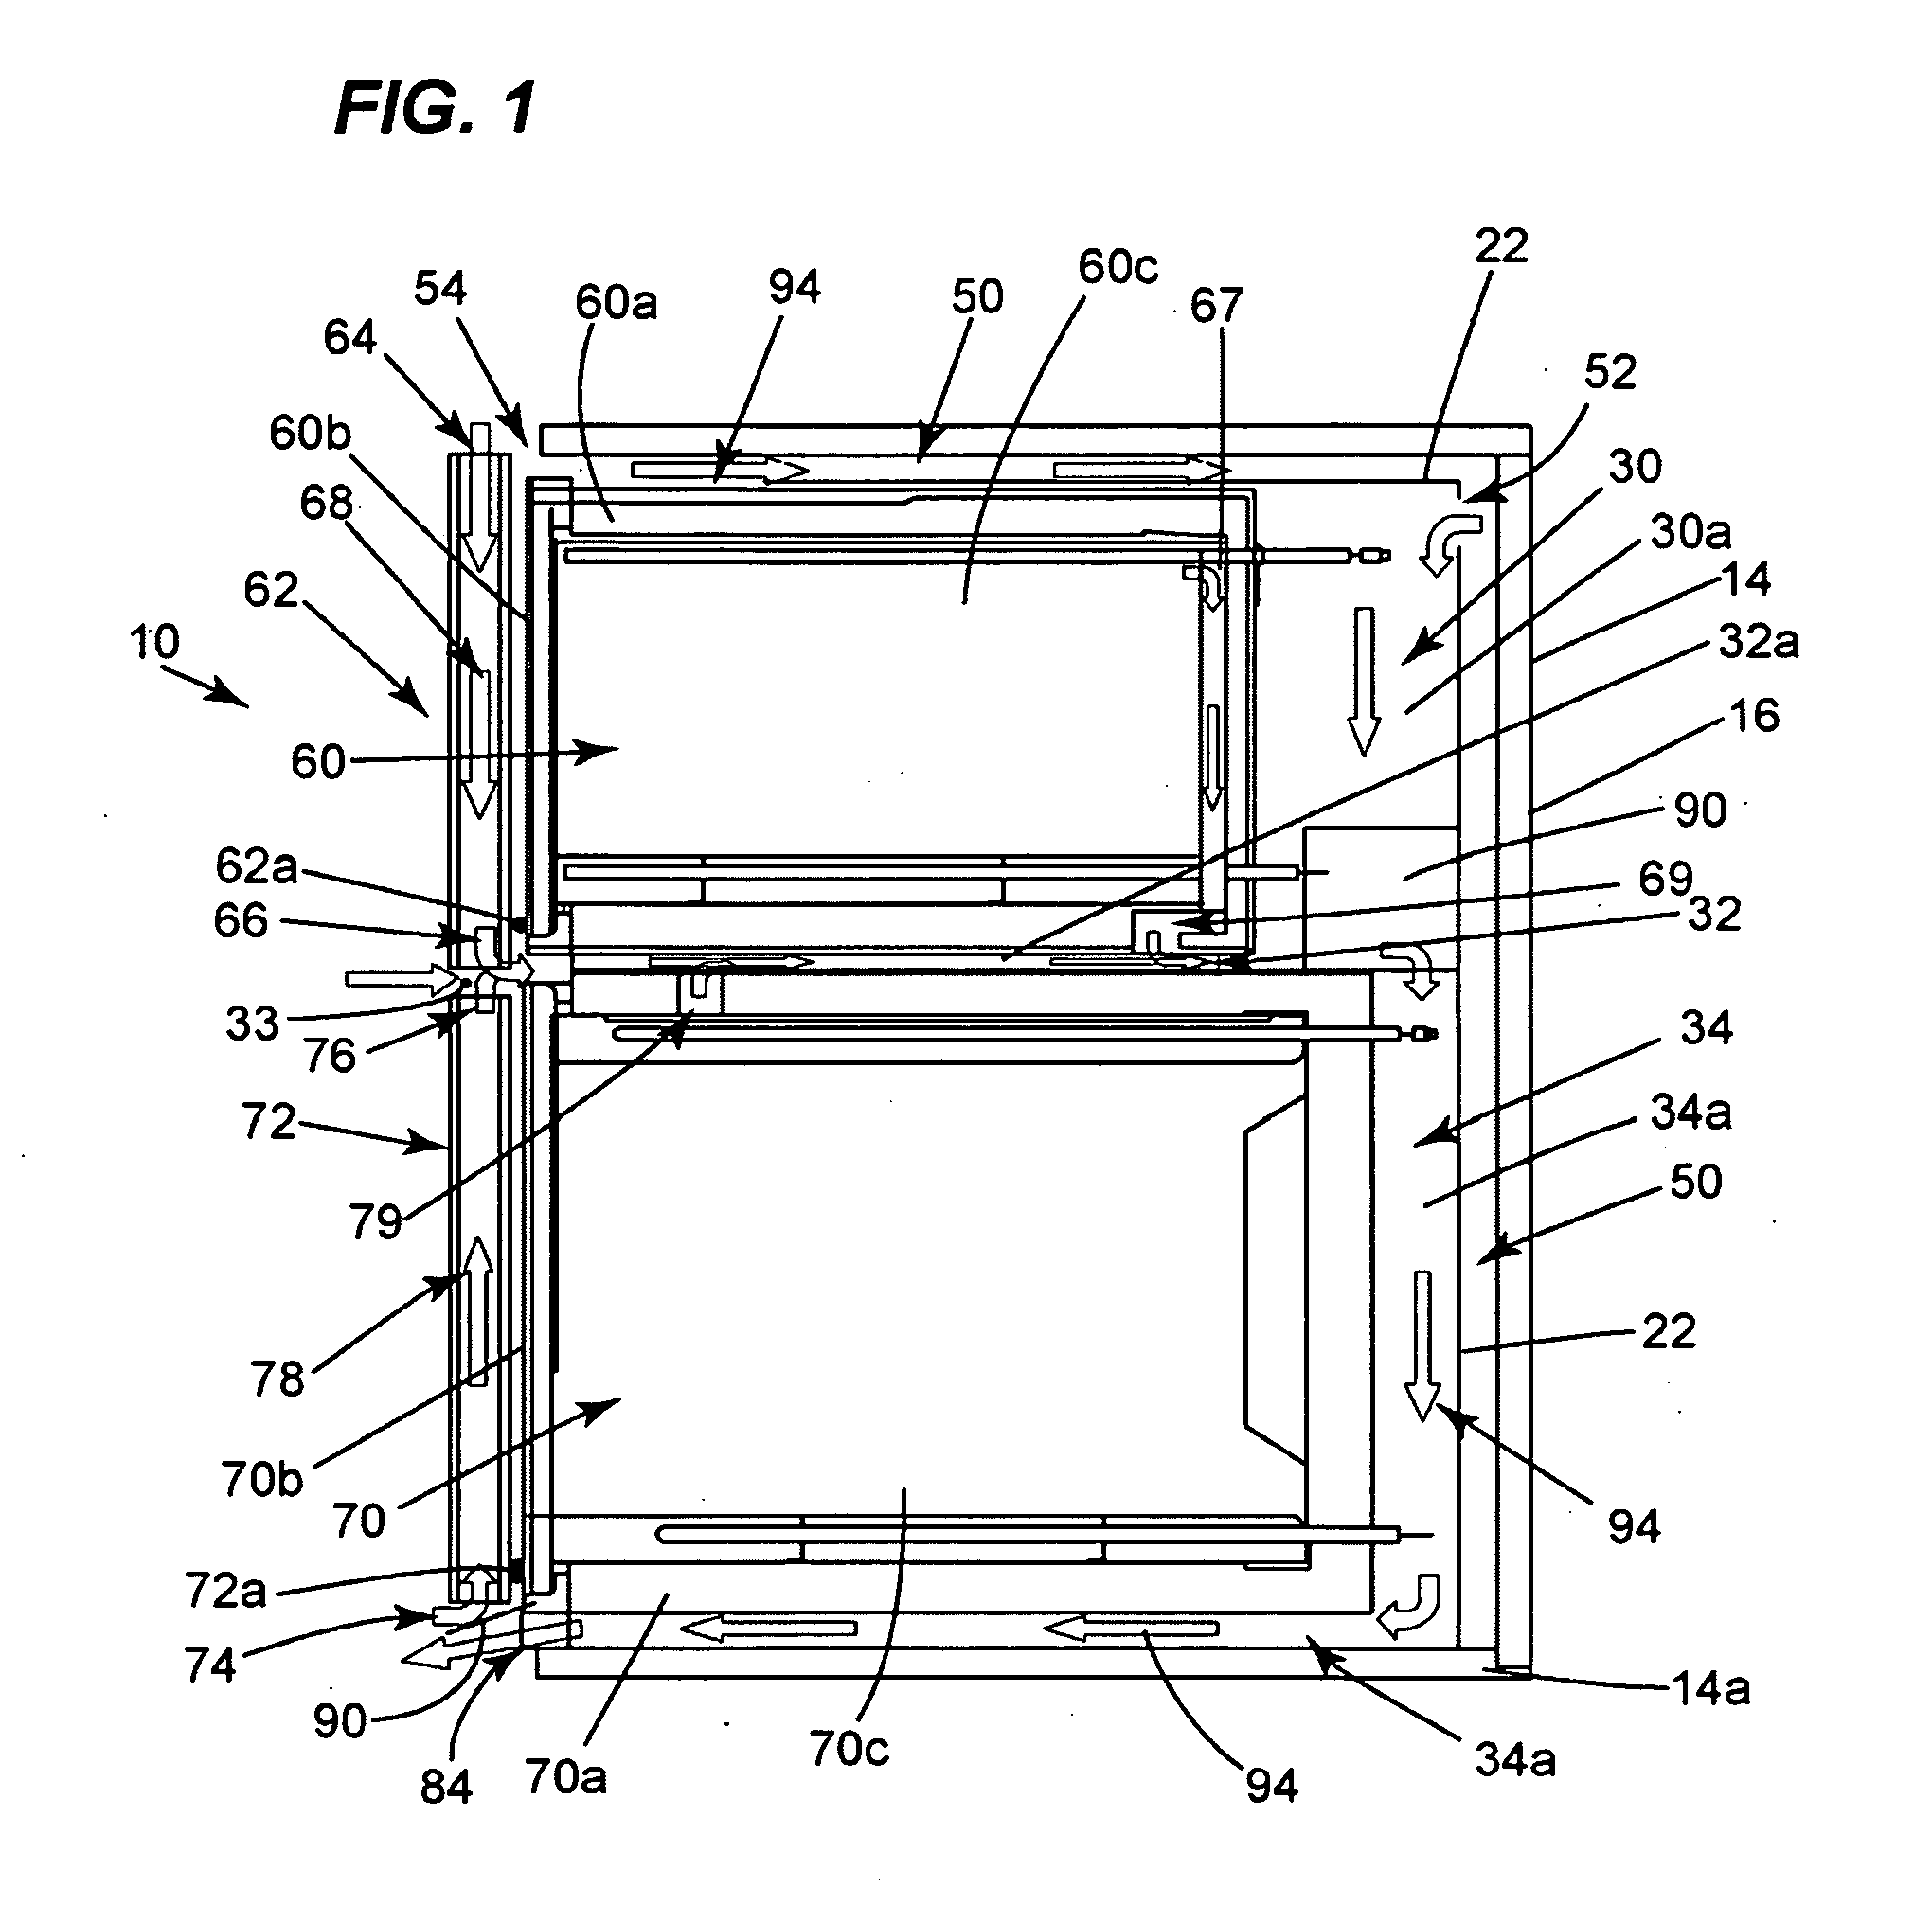 Appliance with a vacuum-based reverse airflow cooling system using one fan